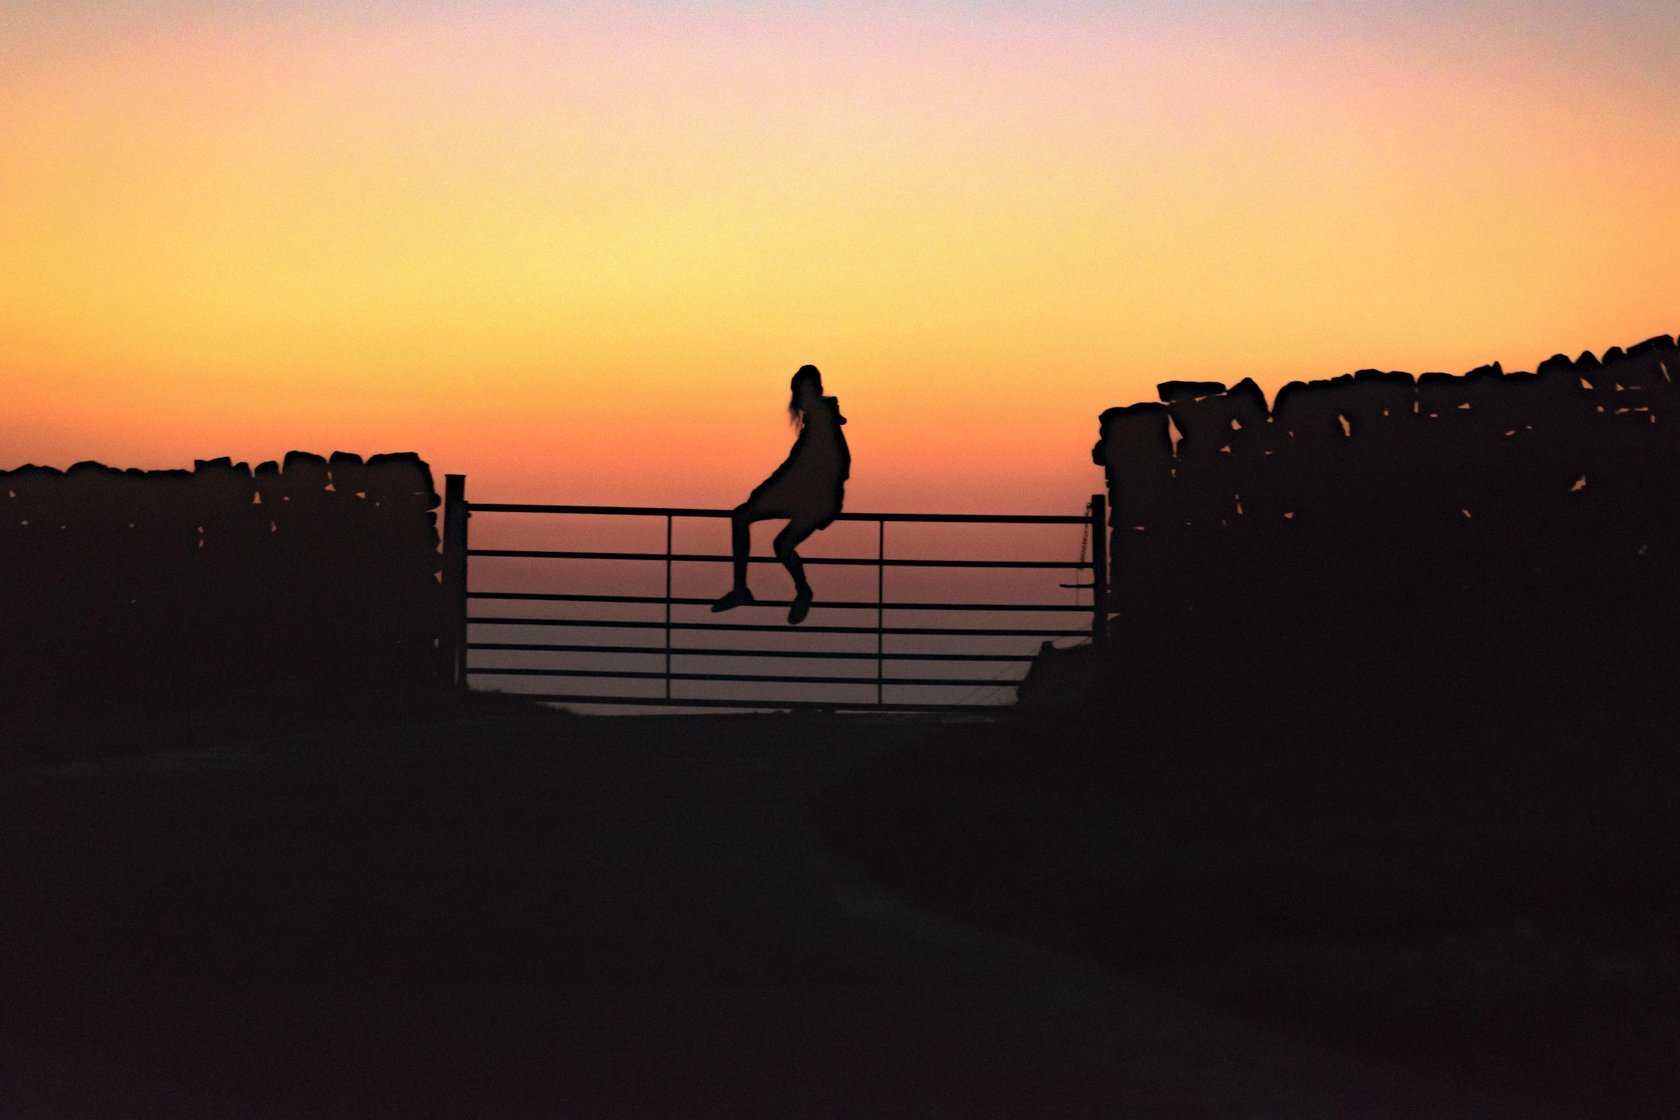 Silhouette Photography: The Art of Capturing Cool Silhouettes Image5